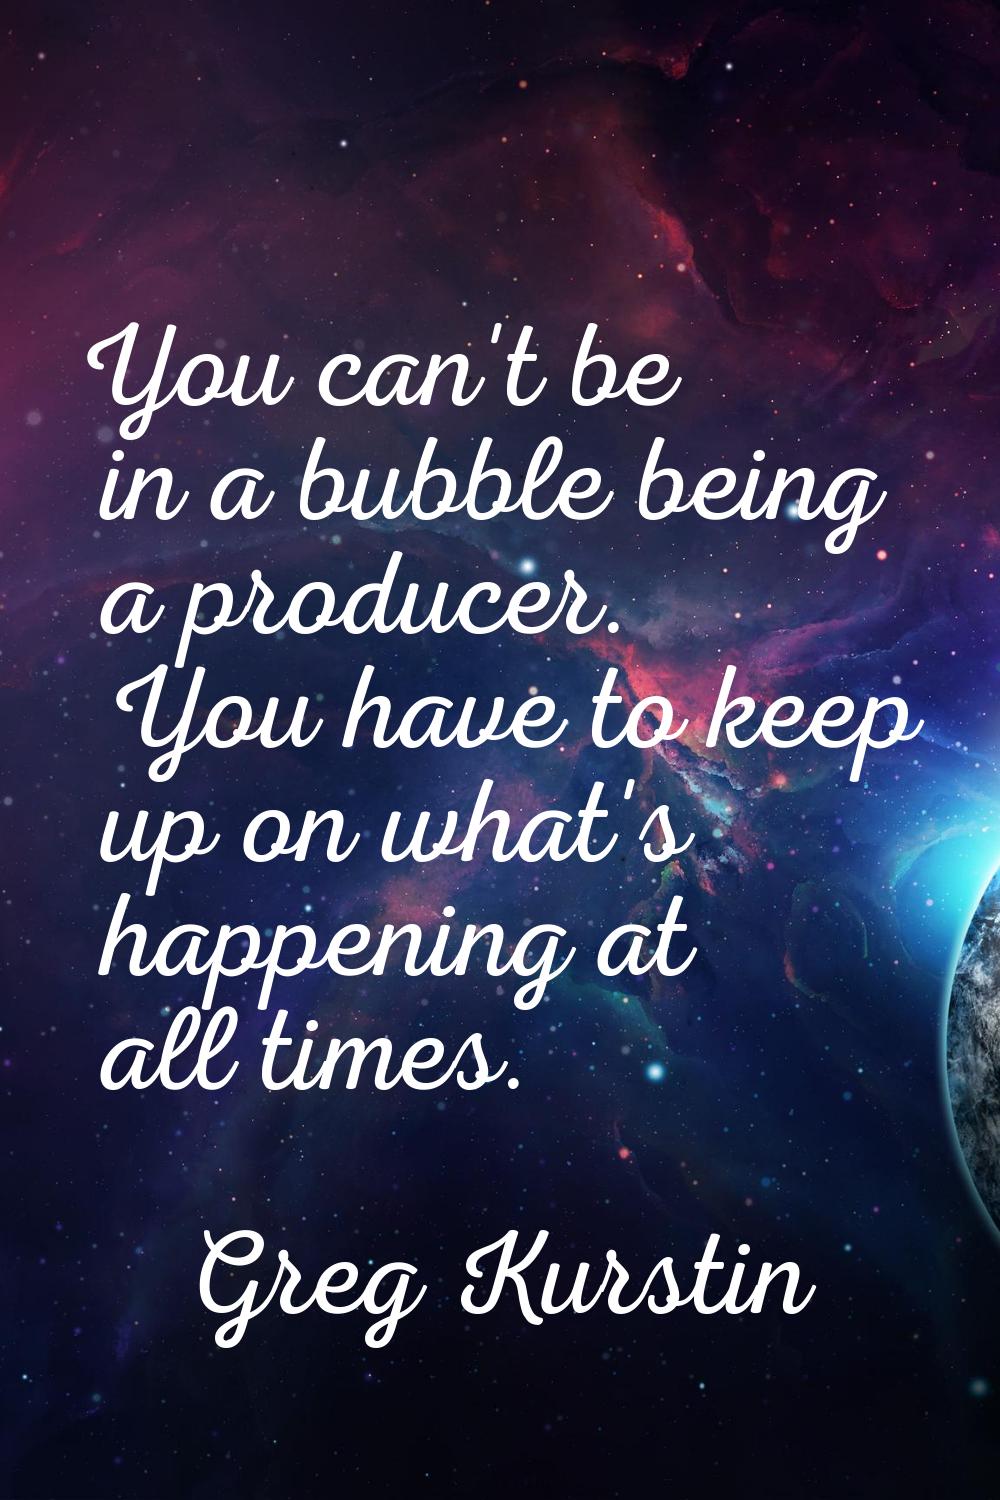 You can't be in a bubble being a producer. You have to keep up on what's happening at all times.